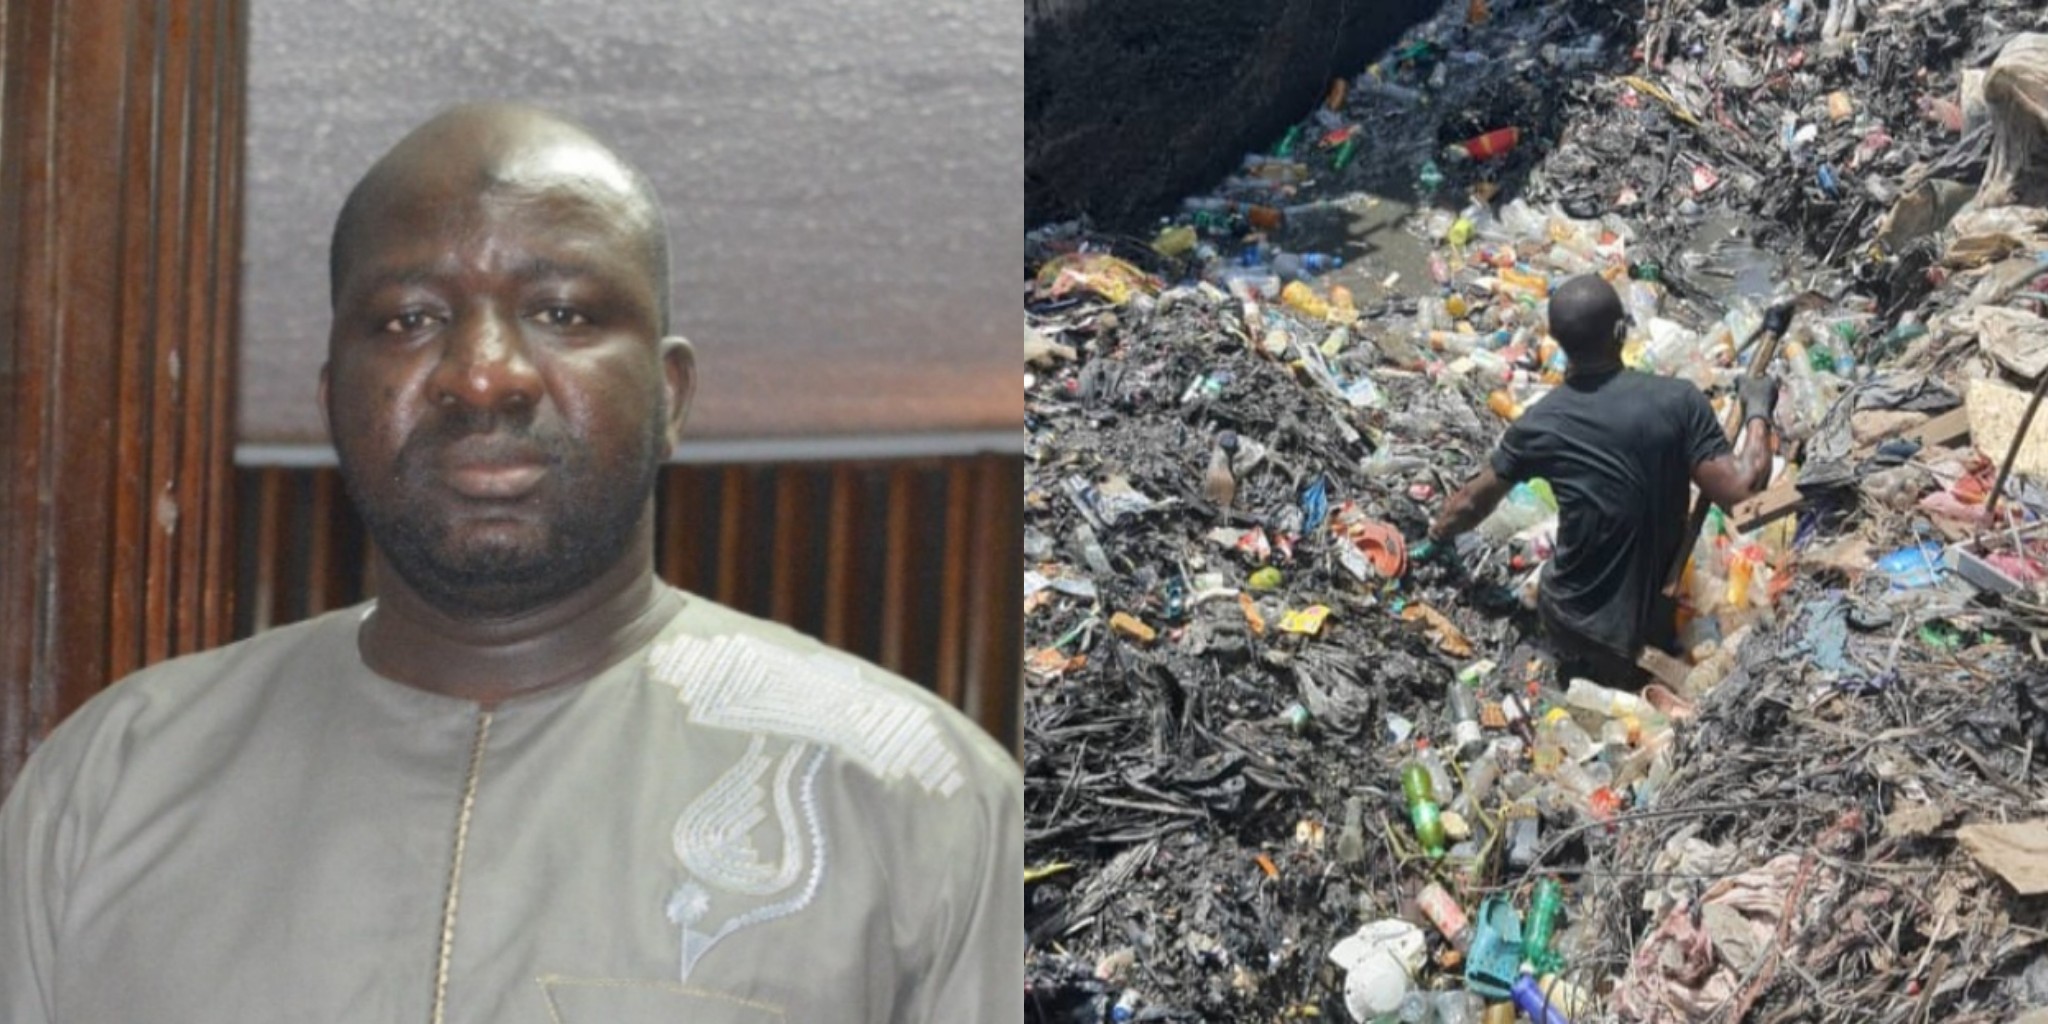 MP Raises Concern Over Huge Pile of Garbage at Mo Wharf Community